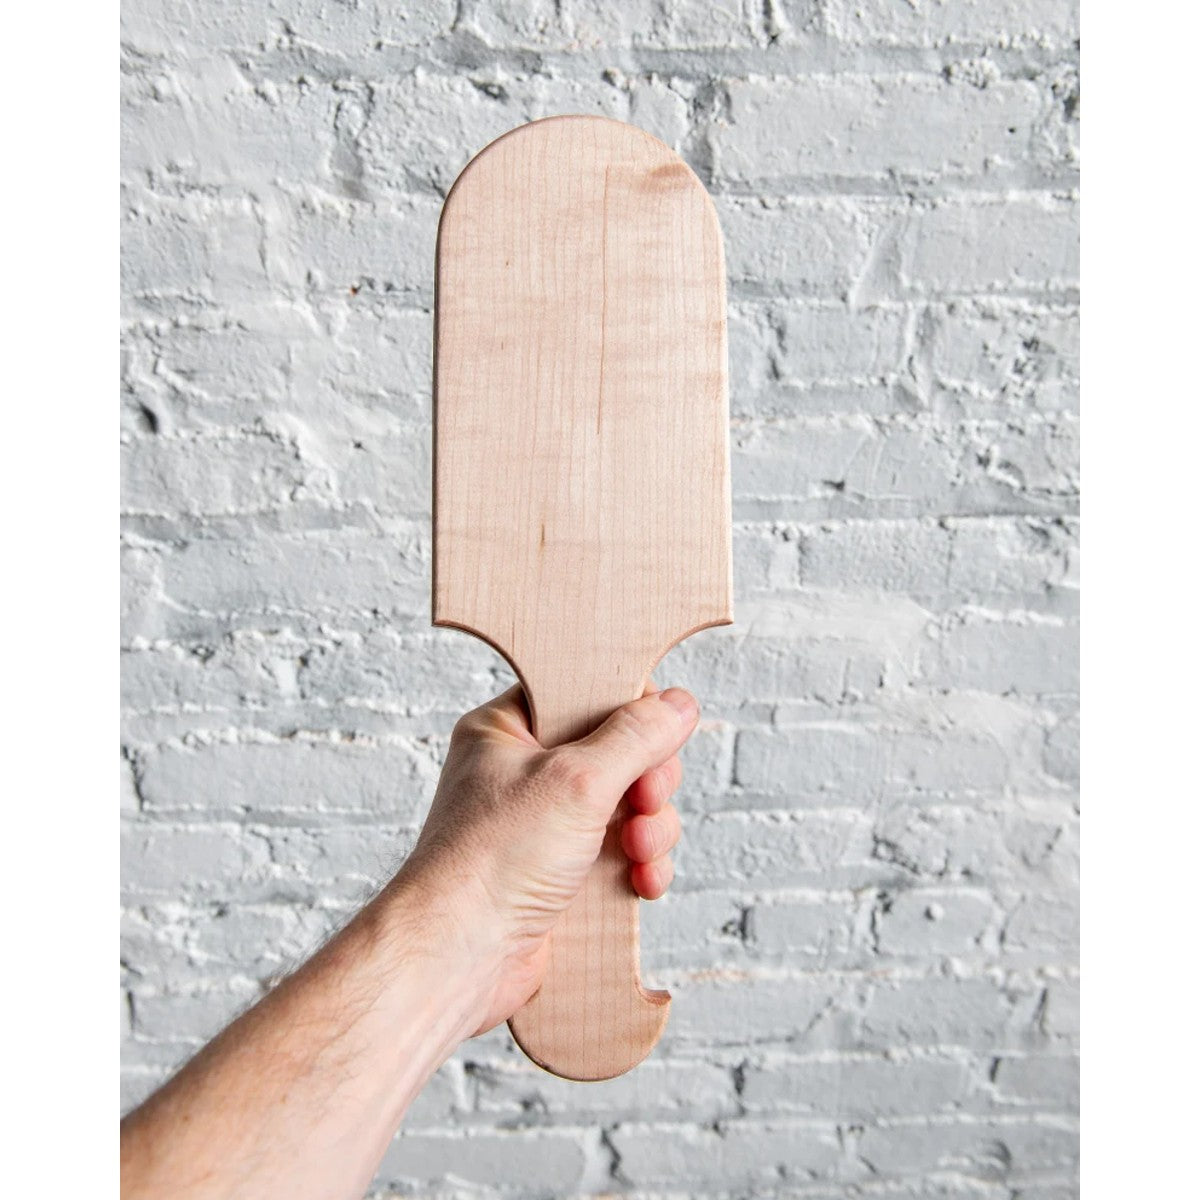 KnK Crafted Wooden Paddle Smoke